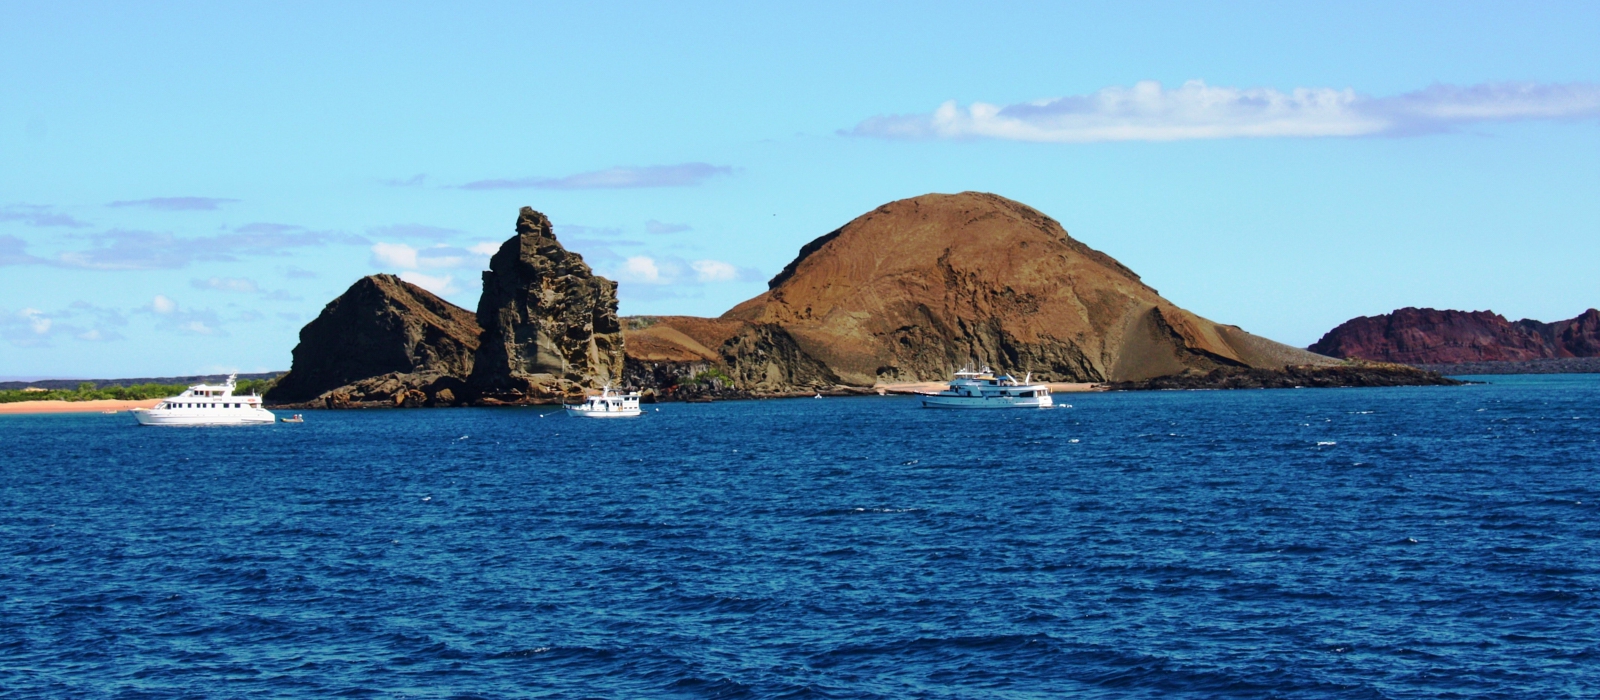 DISCOVER THE GALAPAGOS